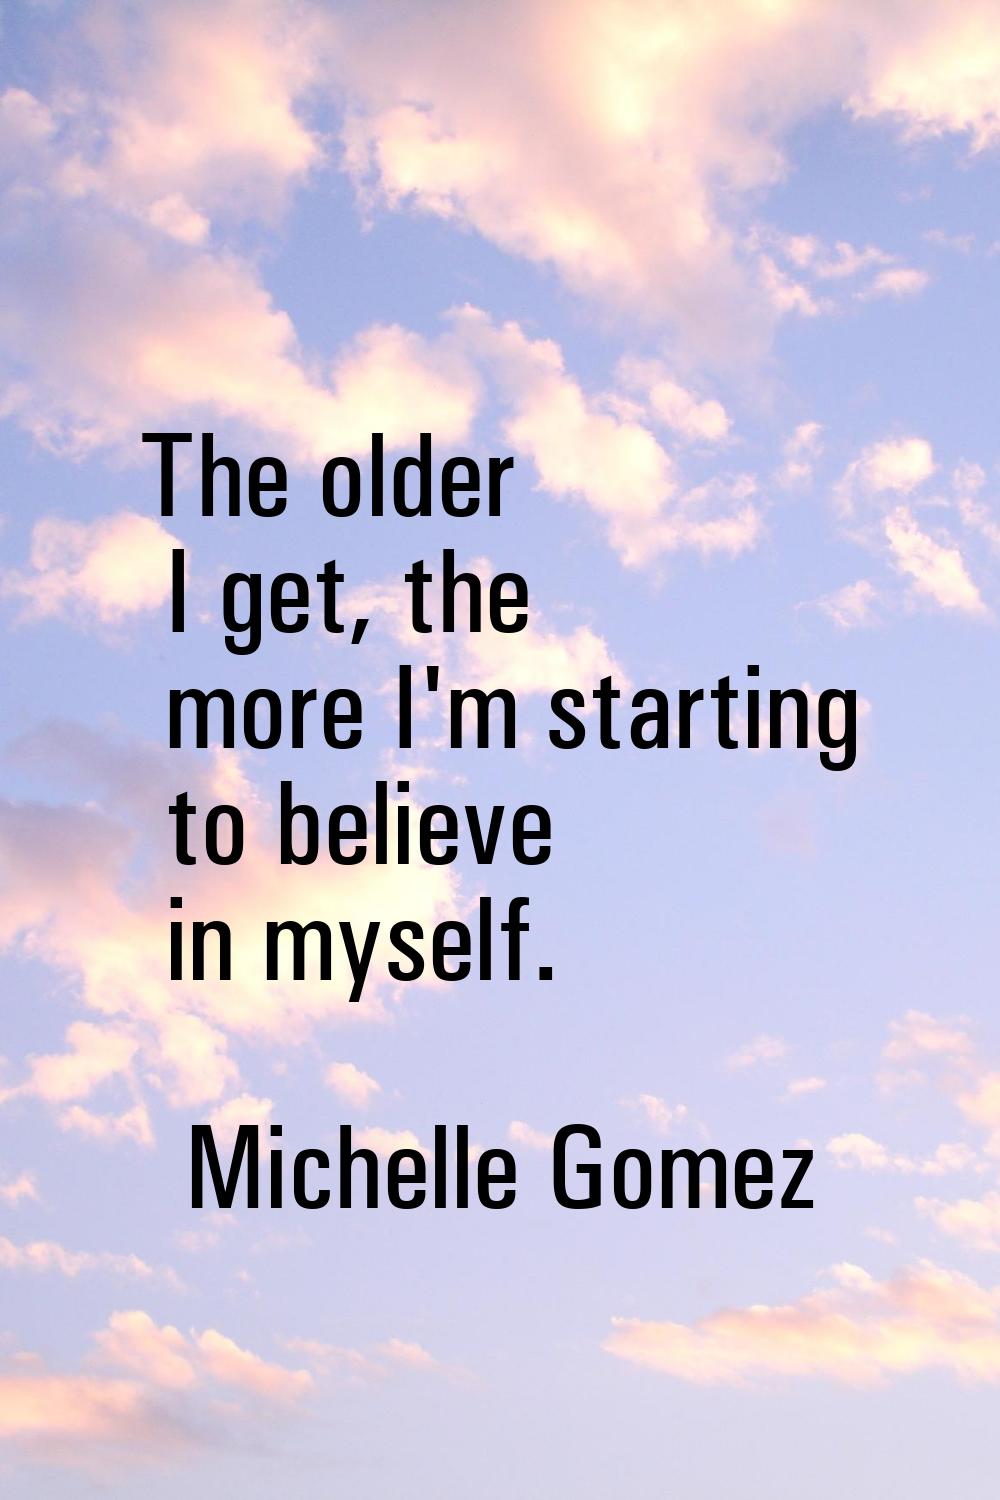 The older I get, the more I'm starting to believe in myself.